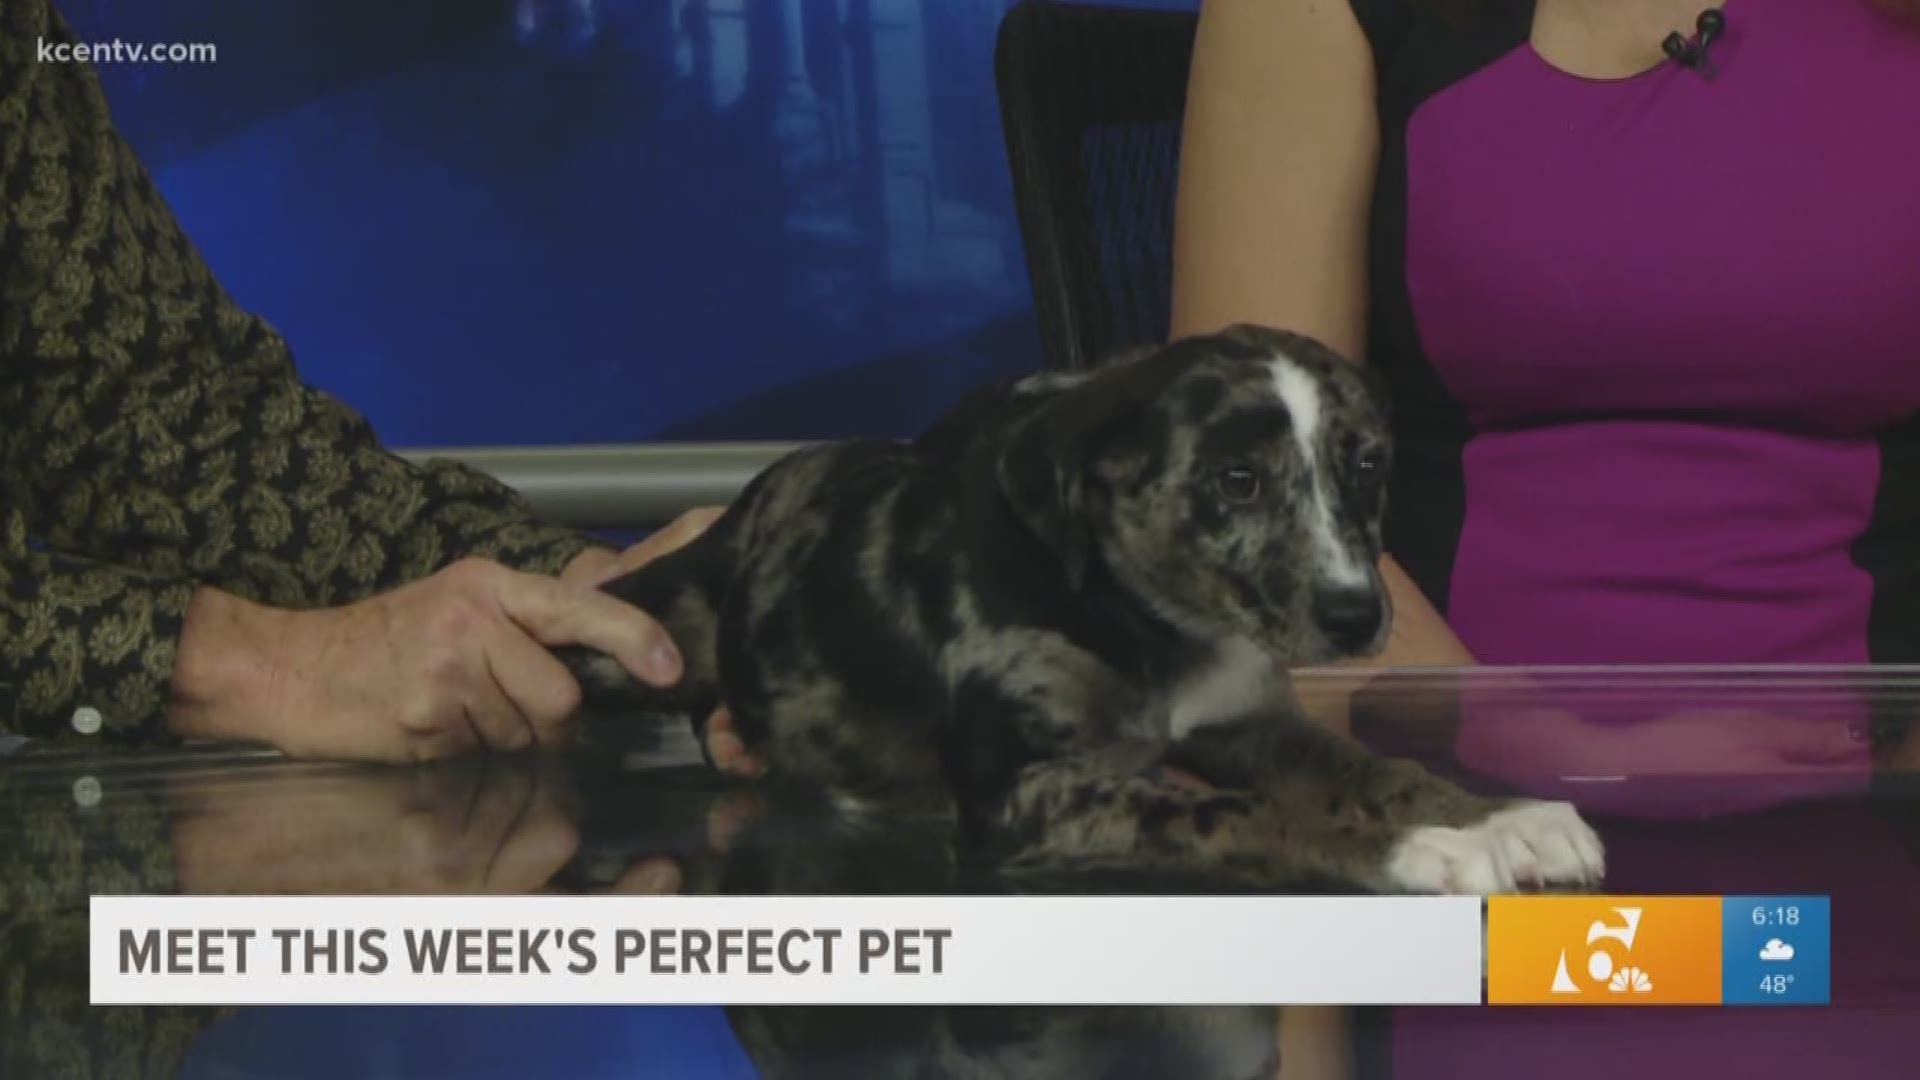 This 3-and-a-half-month-old female Catahoula Leopard dog is ready to be adopted today from the Humane Society of Central Texas.